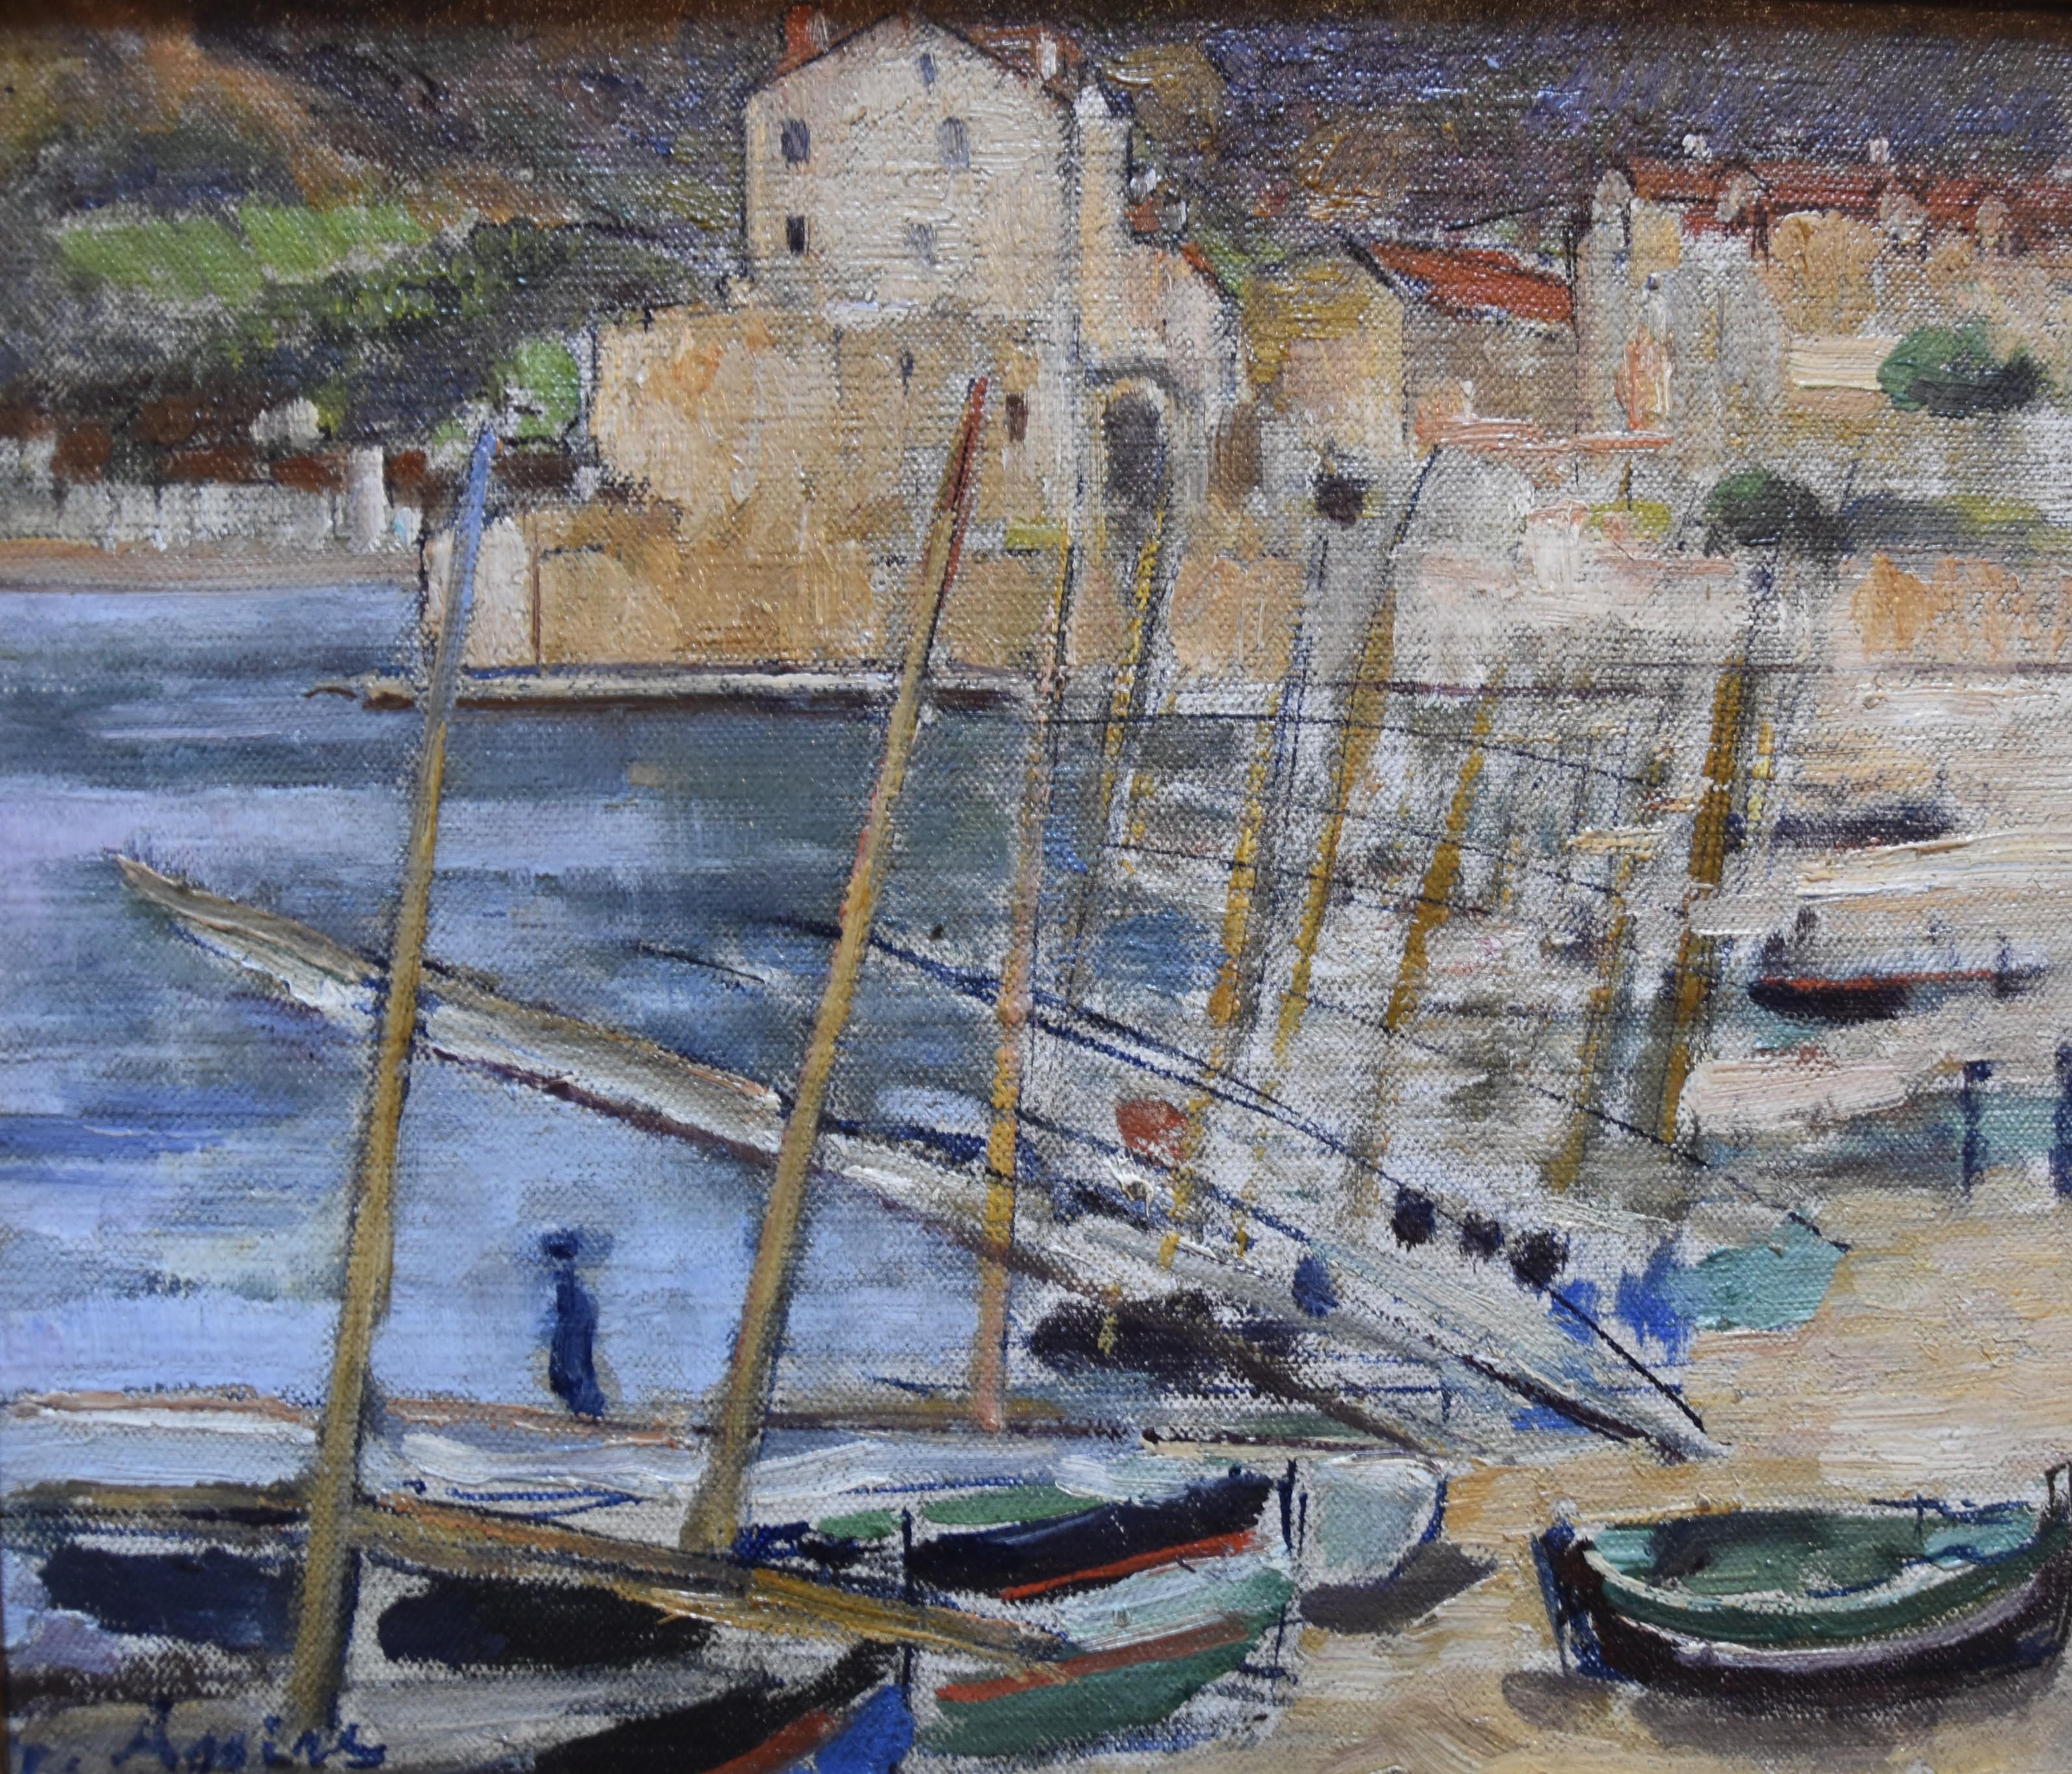 Gustave Assire (1870-1941) 
Boats in the Port of Colllioure
oil on panel
22 x 25.5 cm
Signed lower left
In a modern frame : 35 x 38.5 cm
 
The port of Collioure has inspired numerous paintings but mainly the Fauve painters such as André Derain and